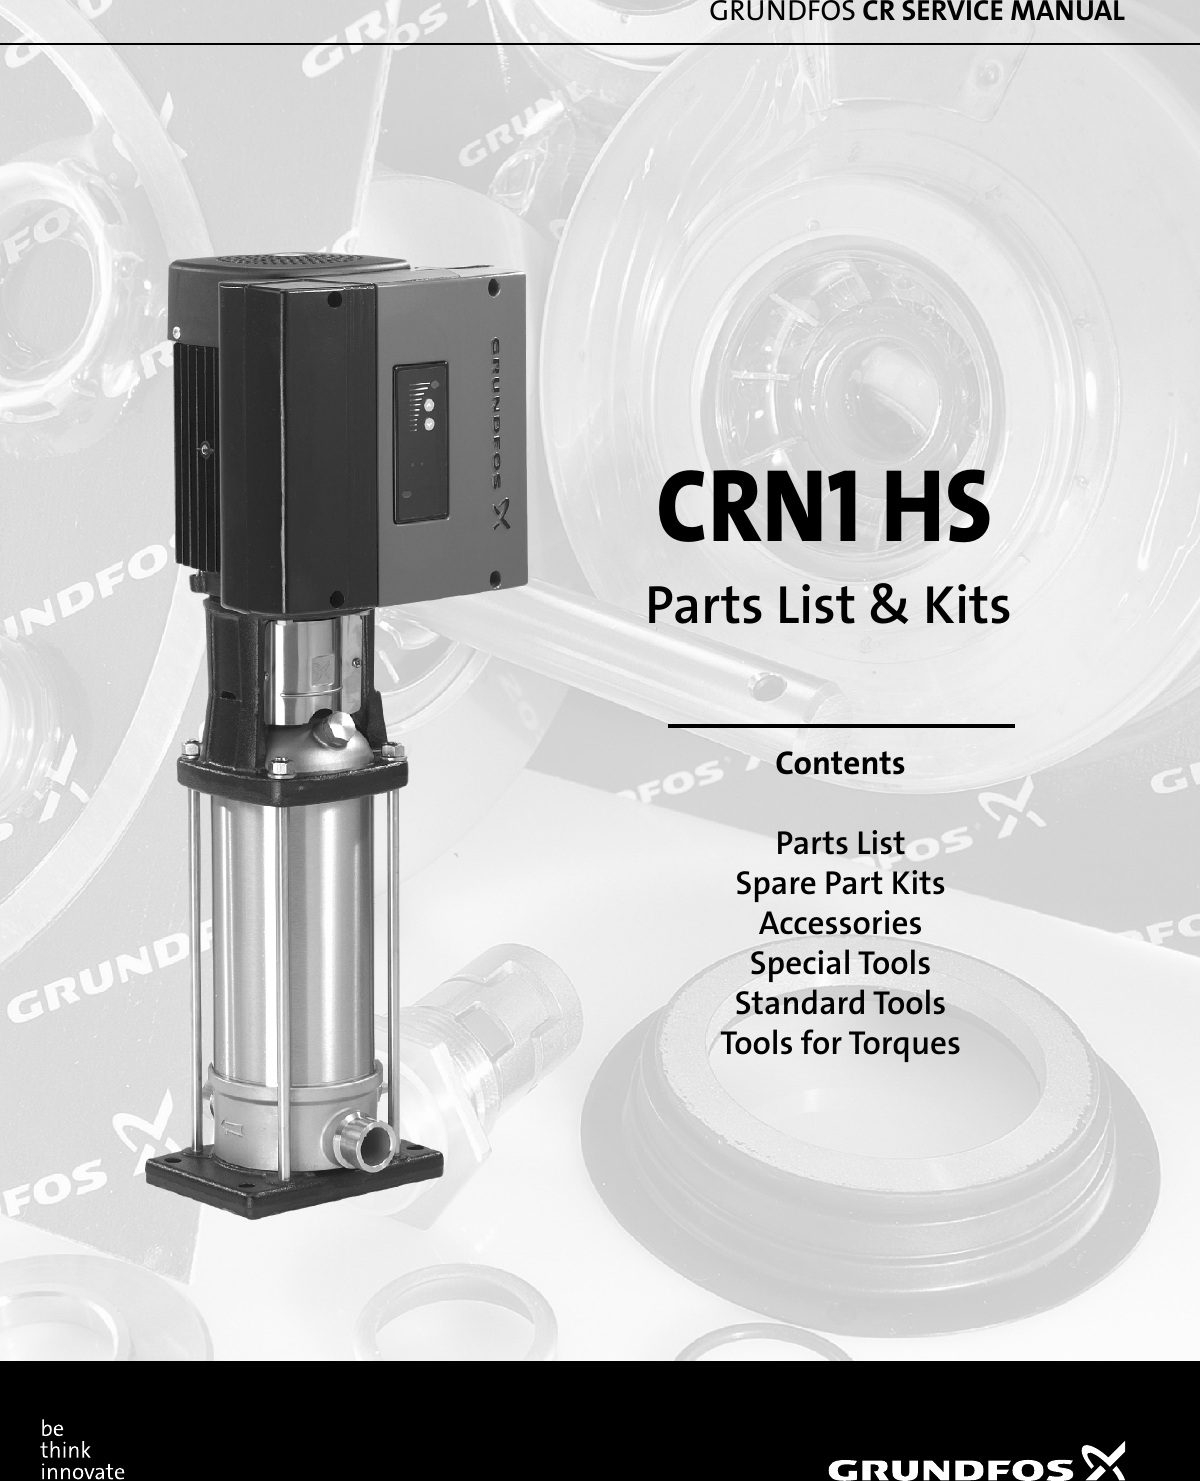 Page 1 of 8 - 548293 3 Grundfos CRN1-HS Series Replacement Parts List